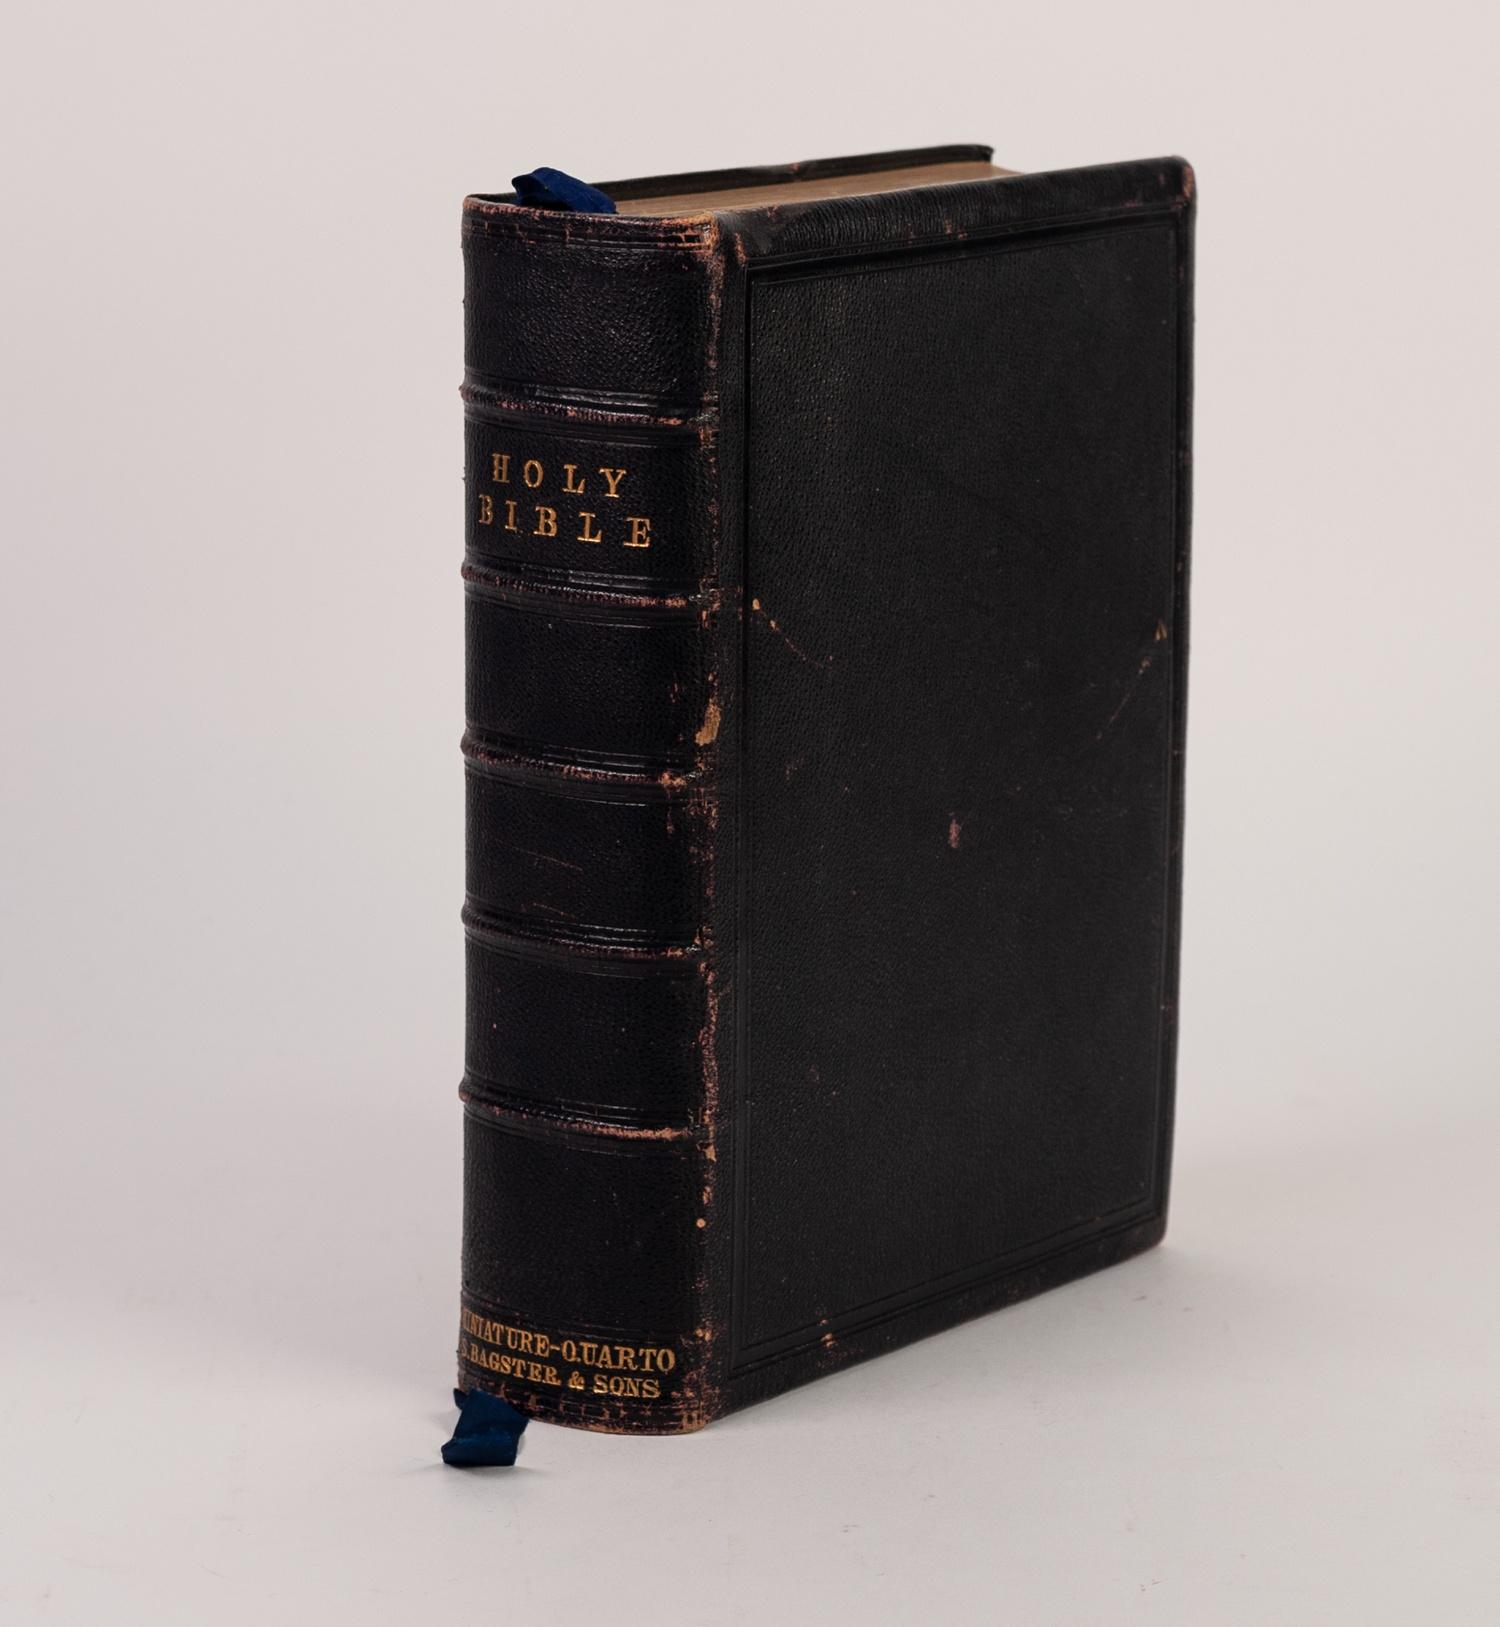 The Holy Bible, Old and New Testament, published London: ?SAMUEL BAGSTER and Sons?. Bound in full